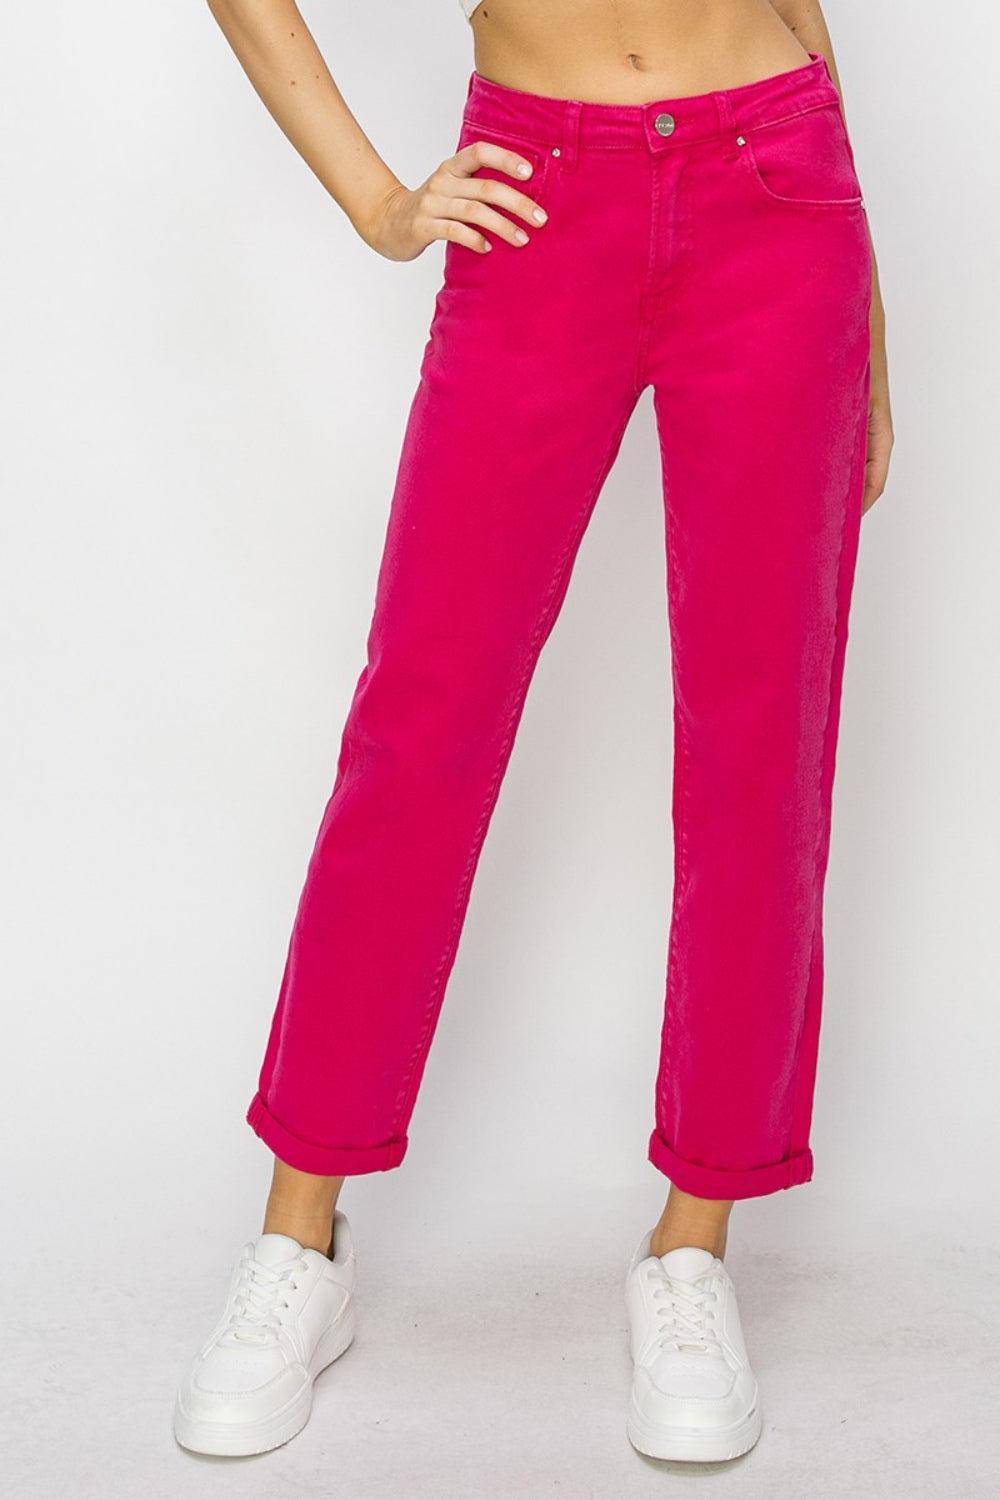 a woman in pink pants posing for a picture